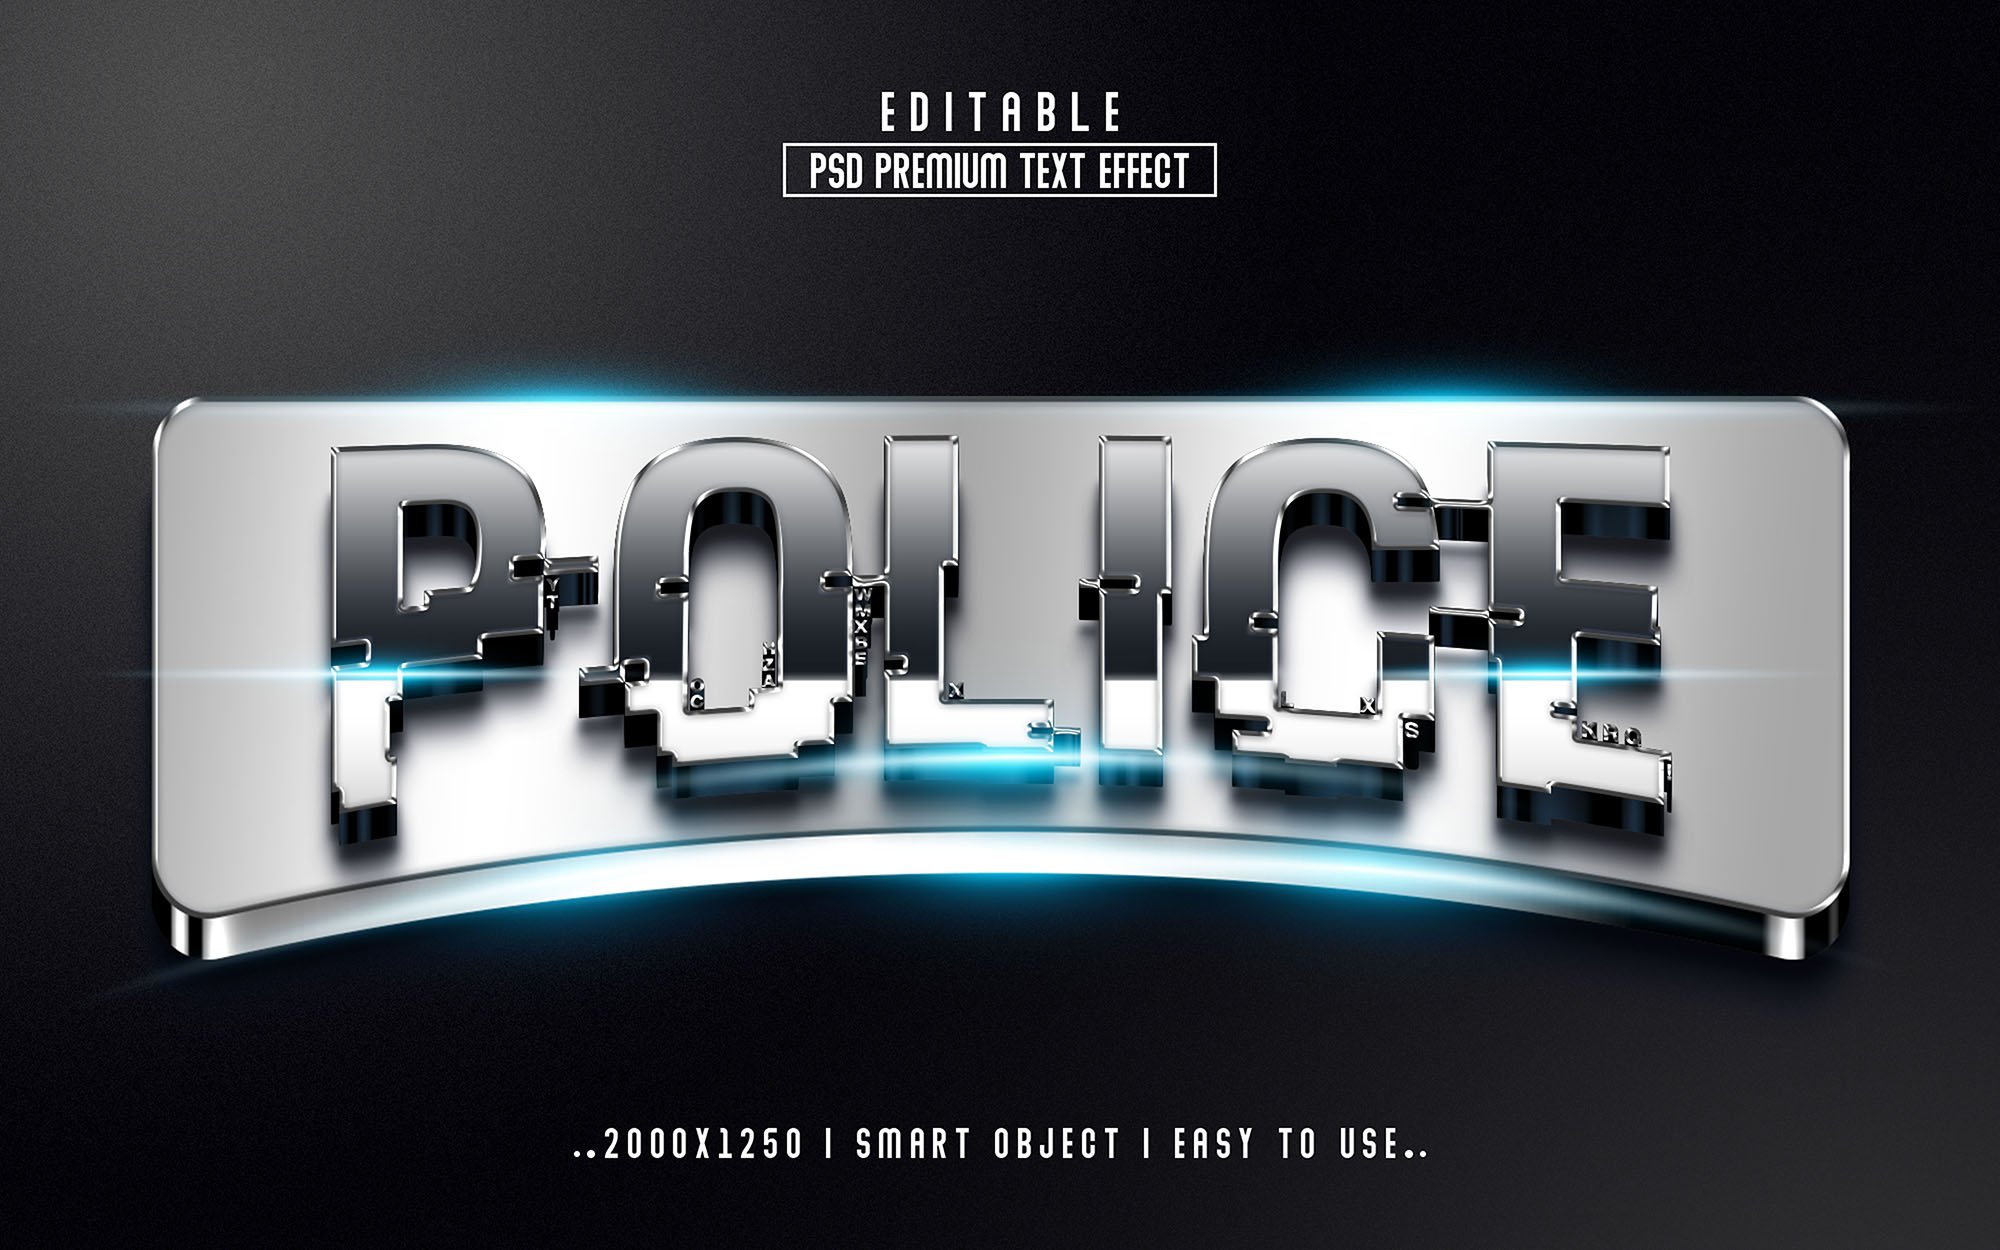 Police 3D Editable Text Effect Stylecover image.